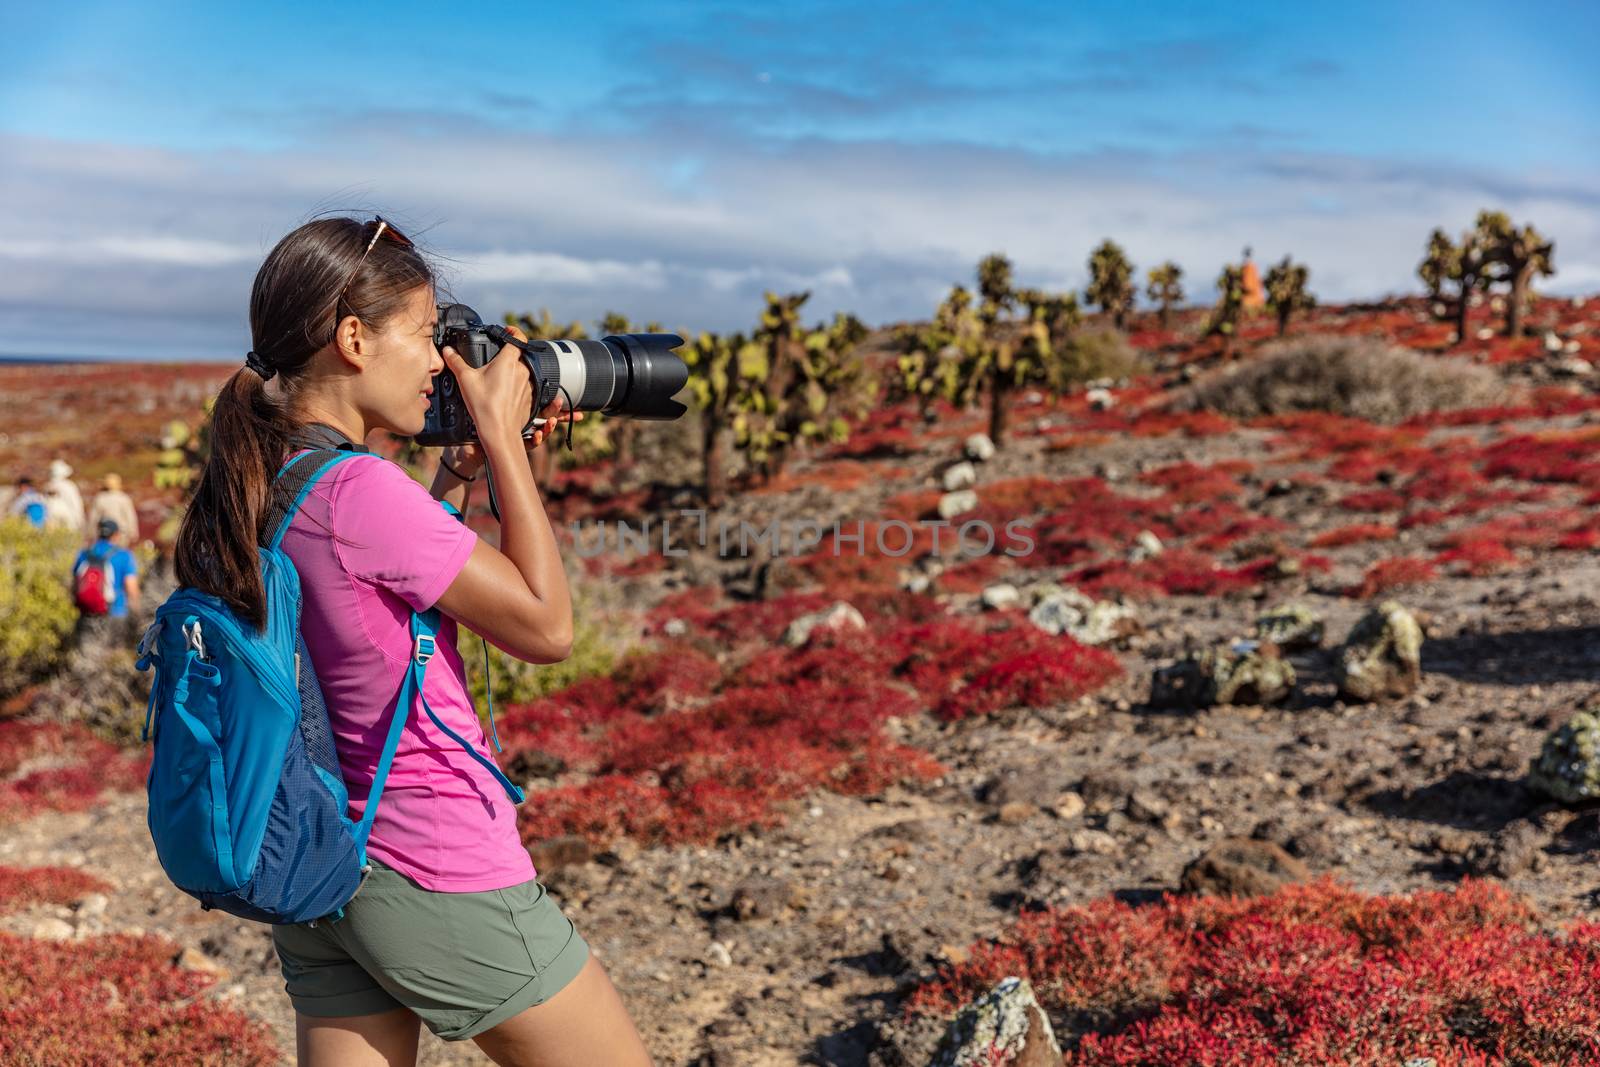 Galapagos tourist taking pictures of wildlife and landscape on North Seymour by Maridav